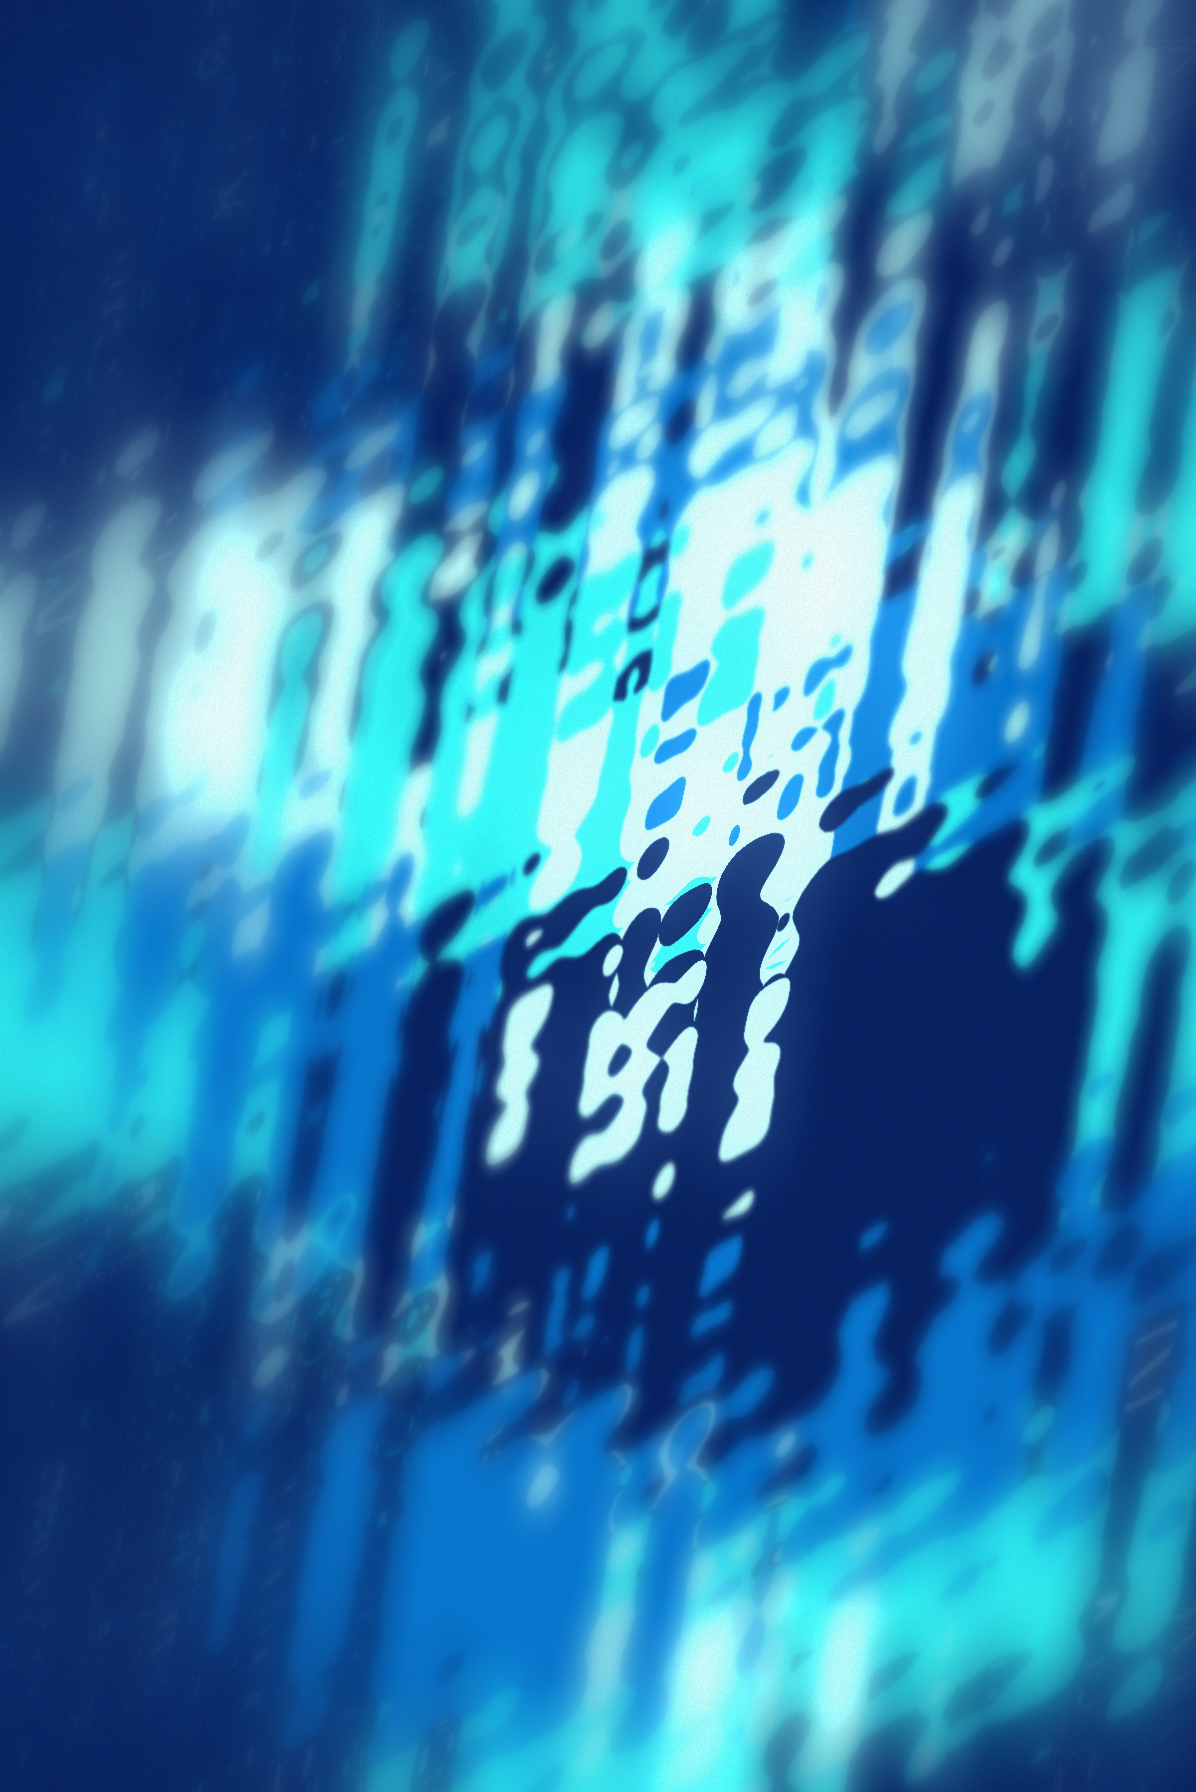 Experiments with shader warping and blur